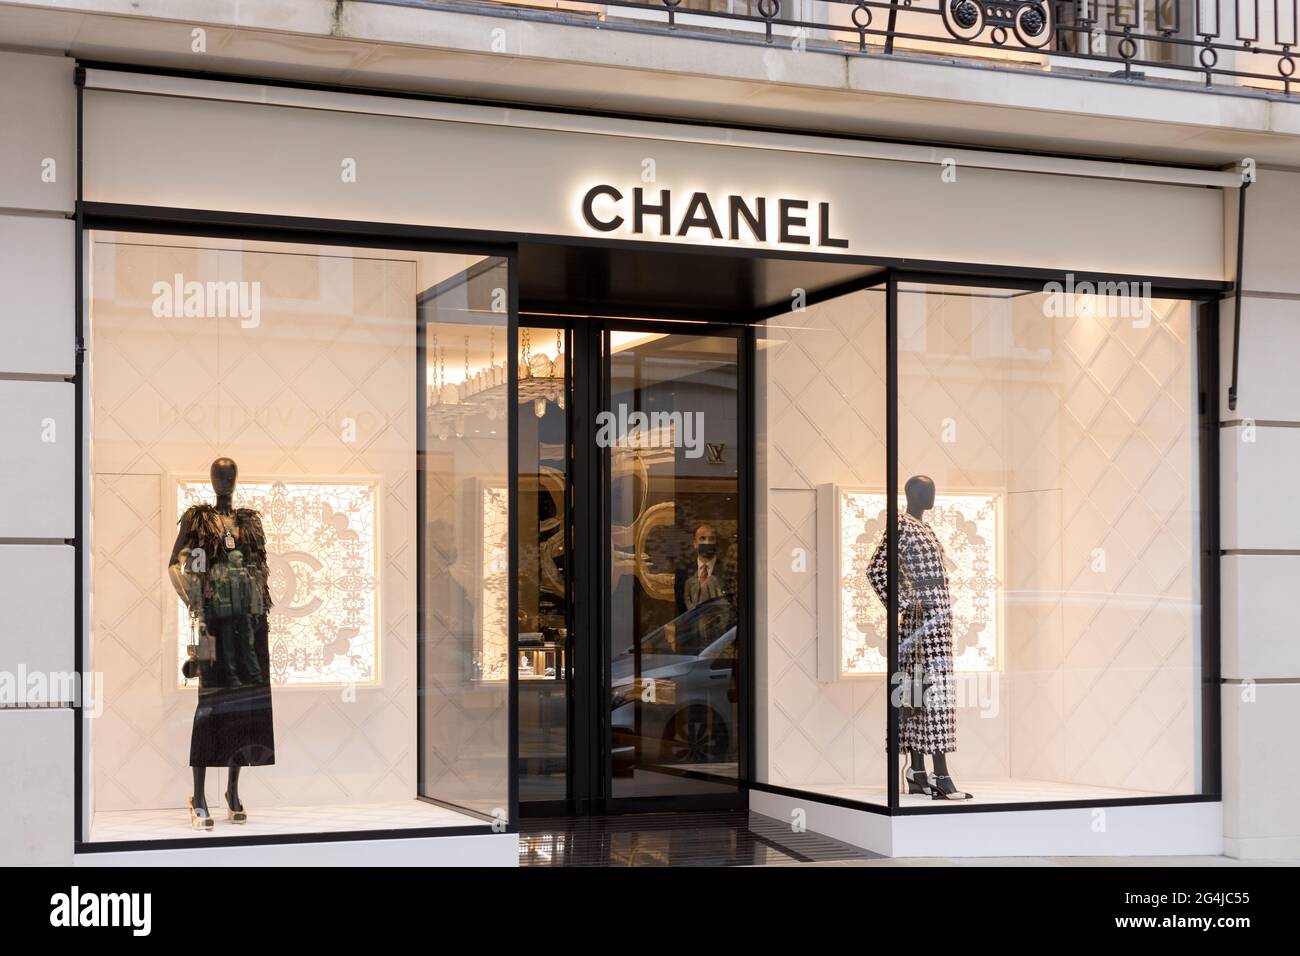 Chanel Store In London Stock Photo  Download Image Now  Chanel  Designer  Label Perfume Window  iStock